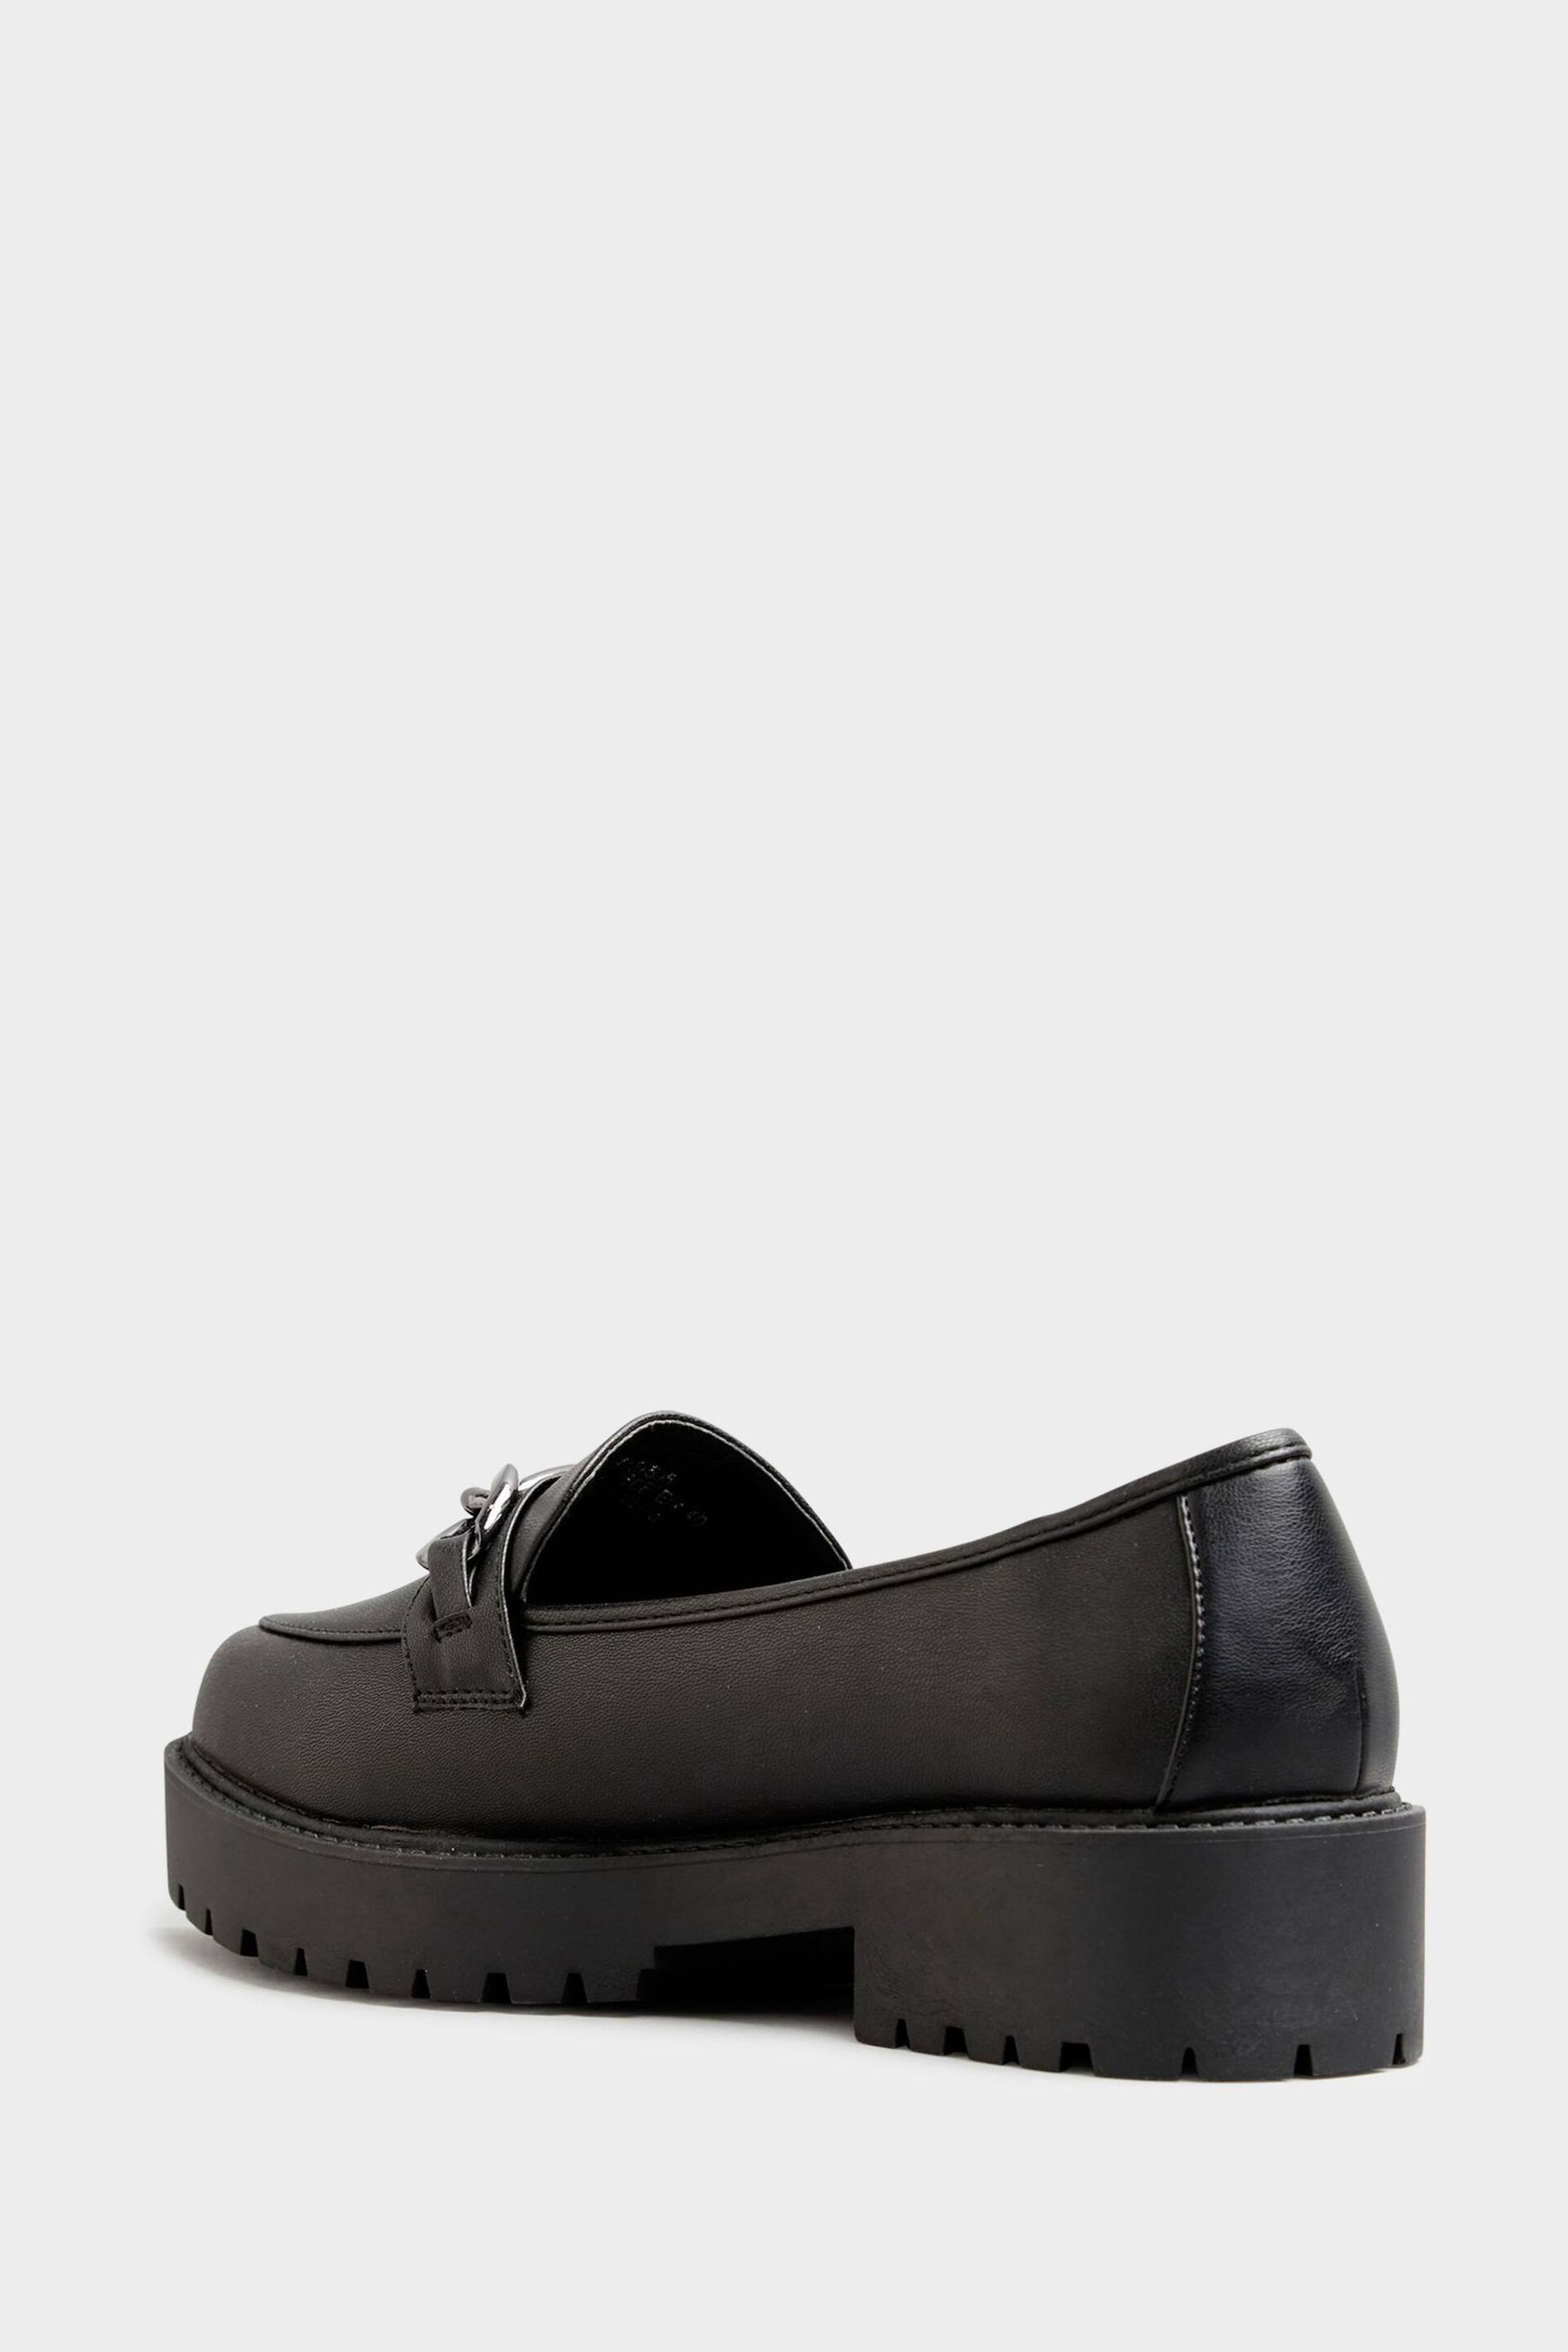 Yours Curve Black Wide FIt Chunky Metal Trim Loafers - Image 3 of 4